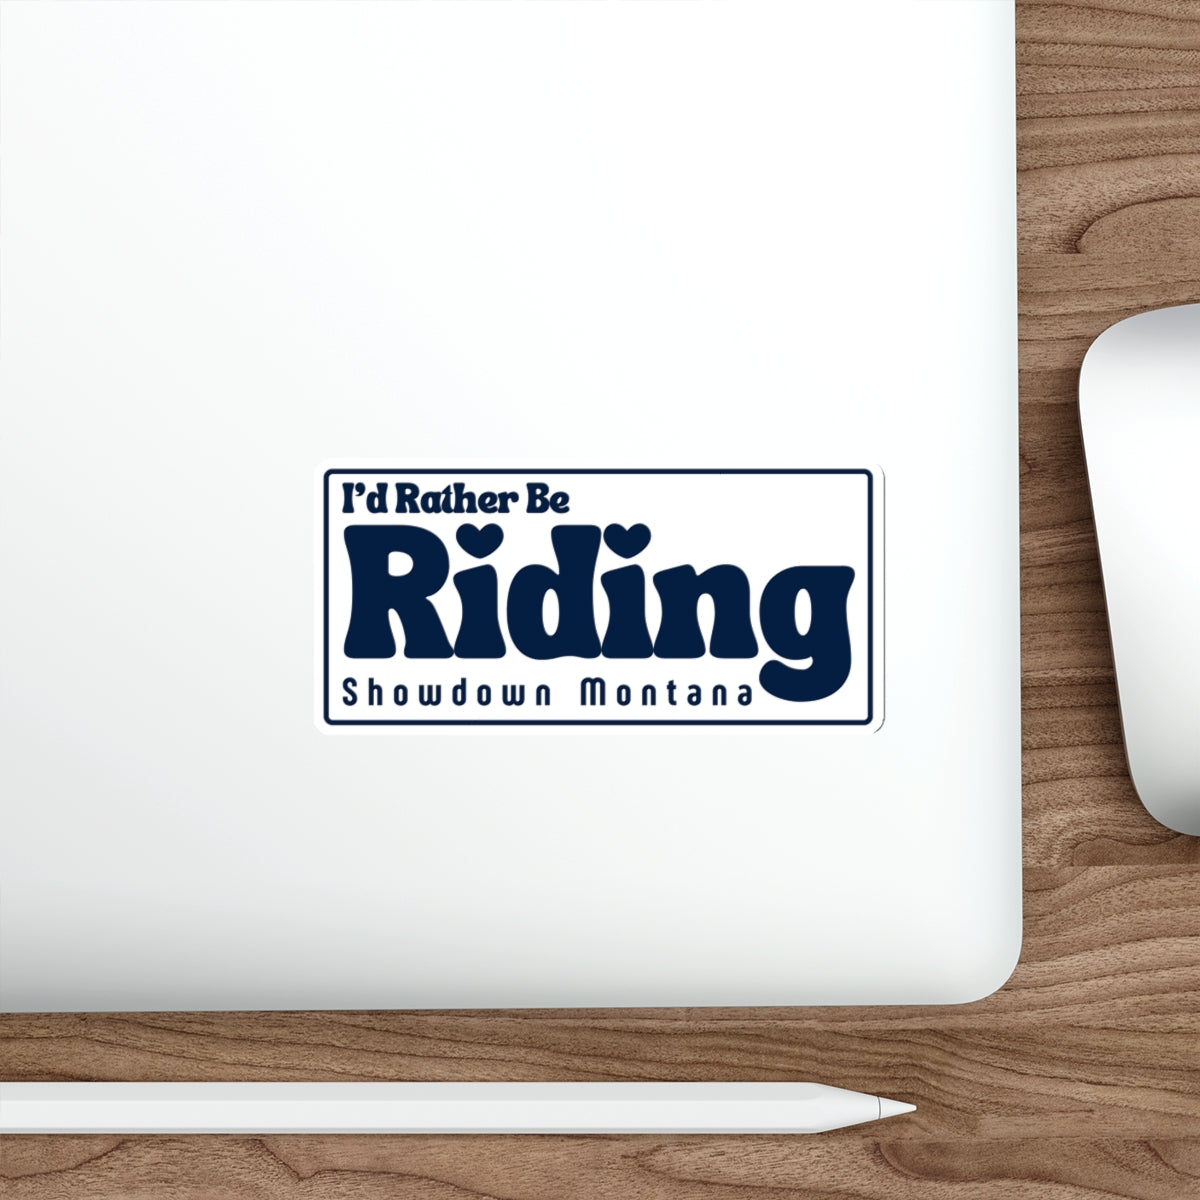 I'd Rather Be Riding Die-Cut Stickers